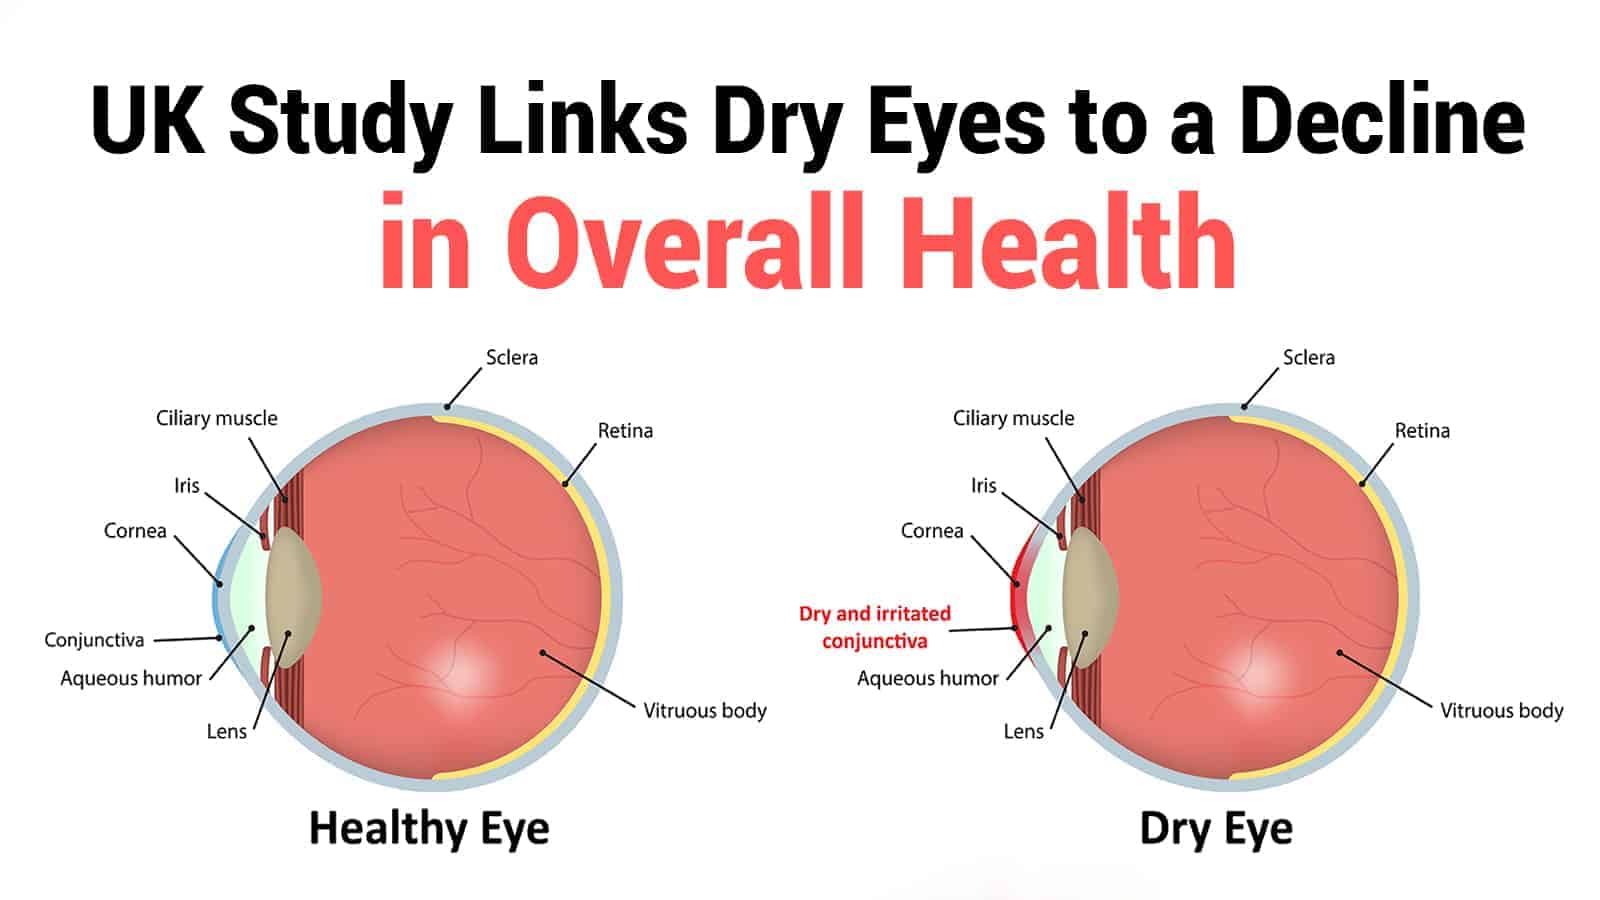 UK Study Links Dry Eyes for Overall Health Decline